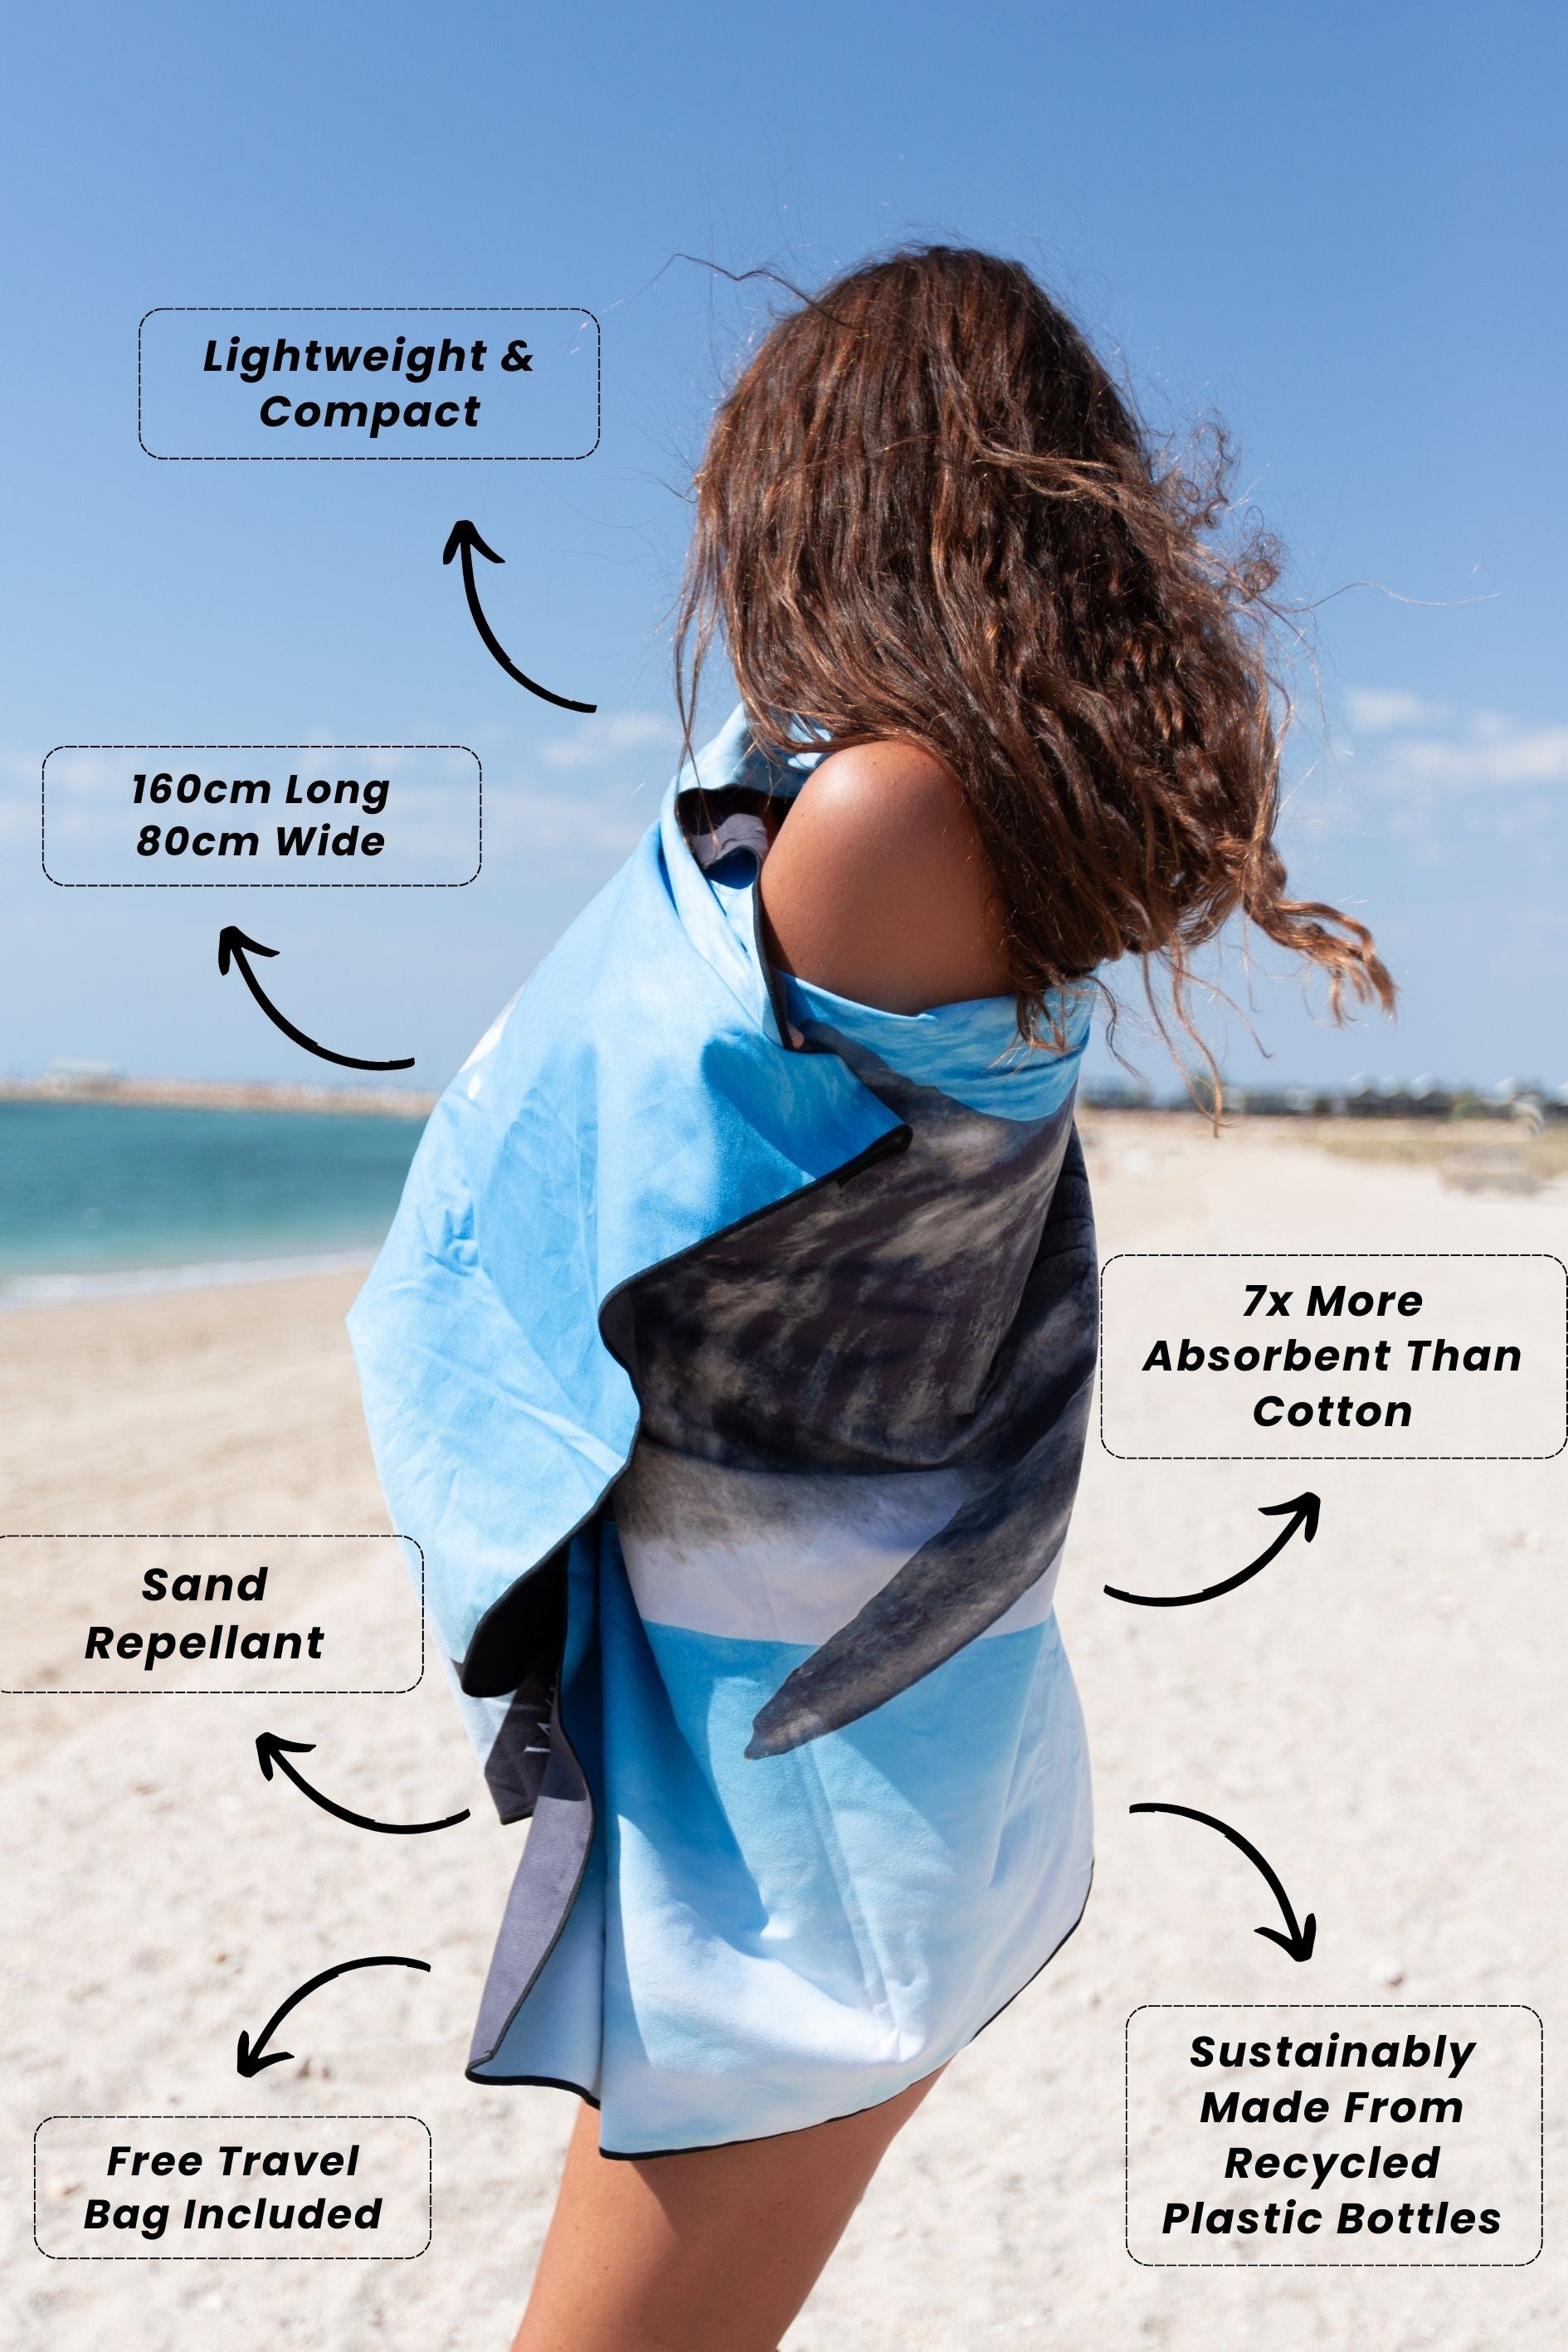 Will and Wind x Jake Wilton Tiger Shark Travel Towel. Light weight, Quick Dry, Compact, Sand Free, 160cm x 80cm